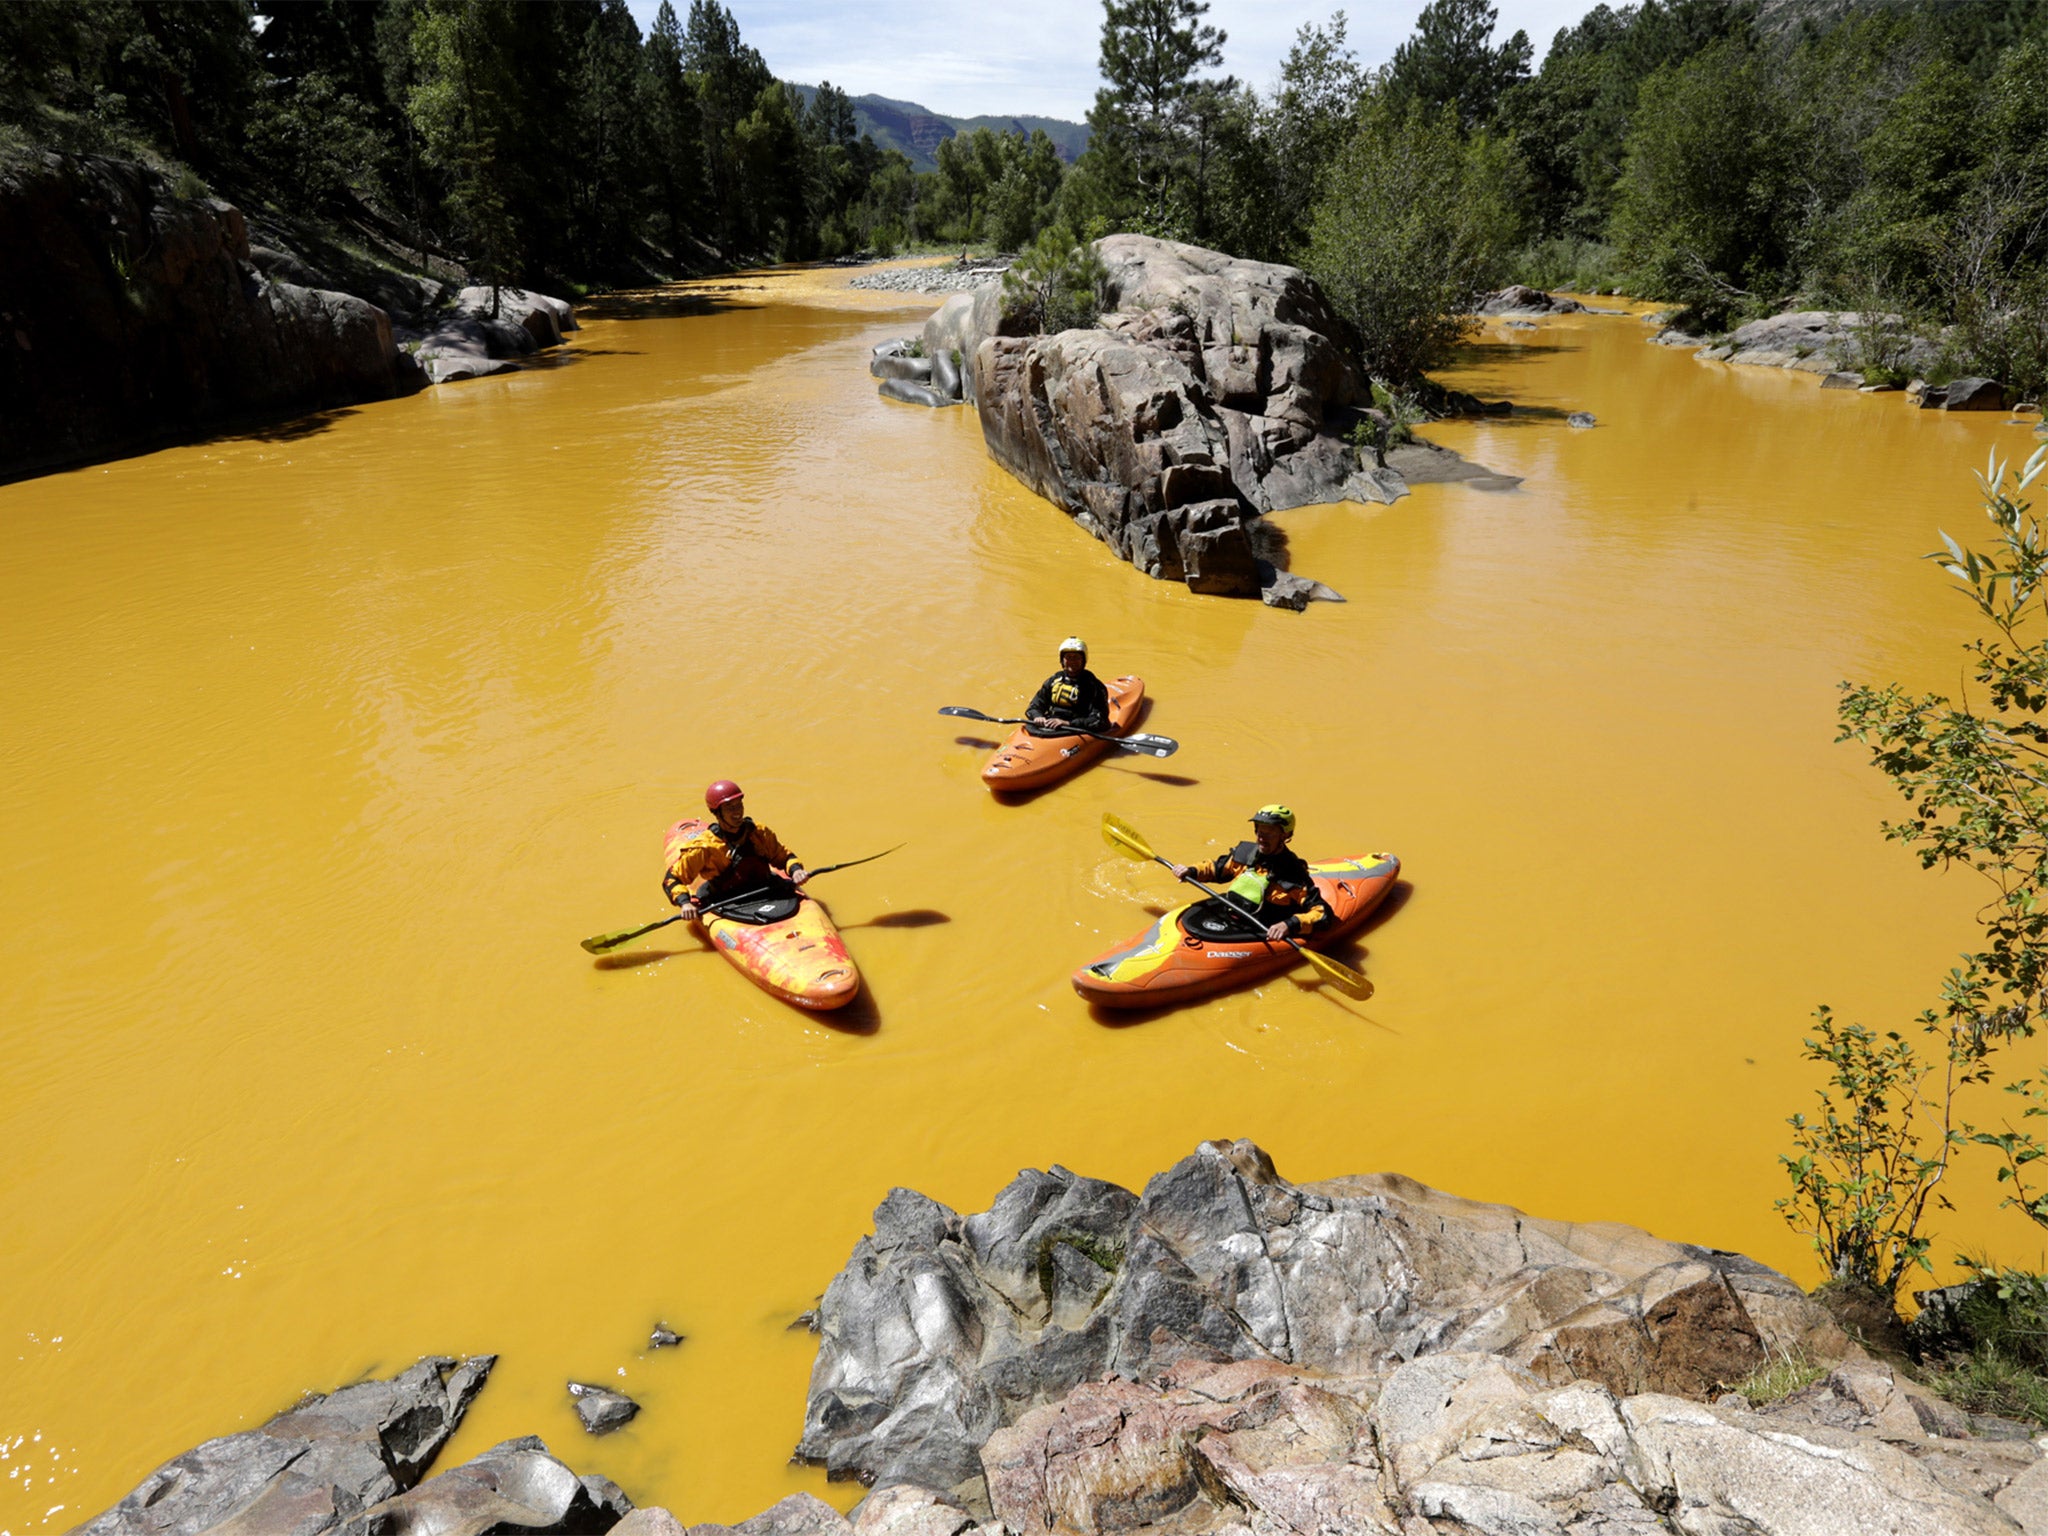 Kayakers paddle on the Animas river in Colorado after three million gallons of effluent escaped in last week’s accident